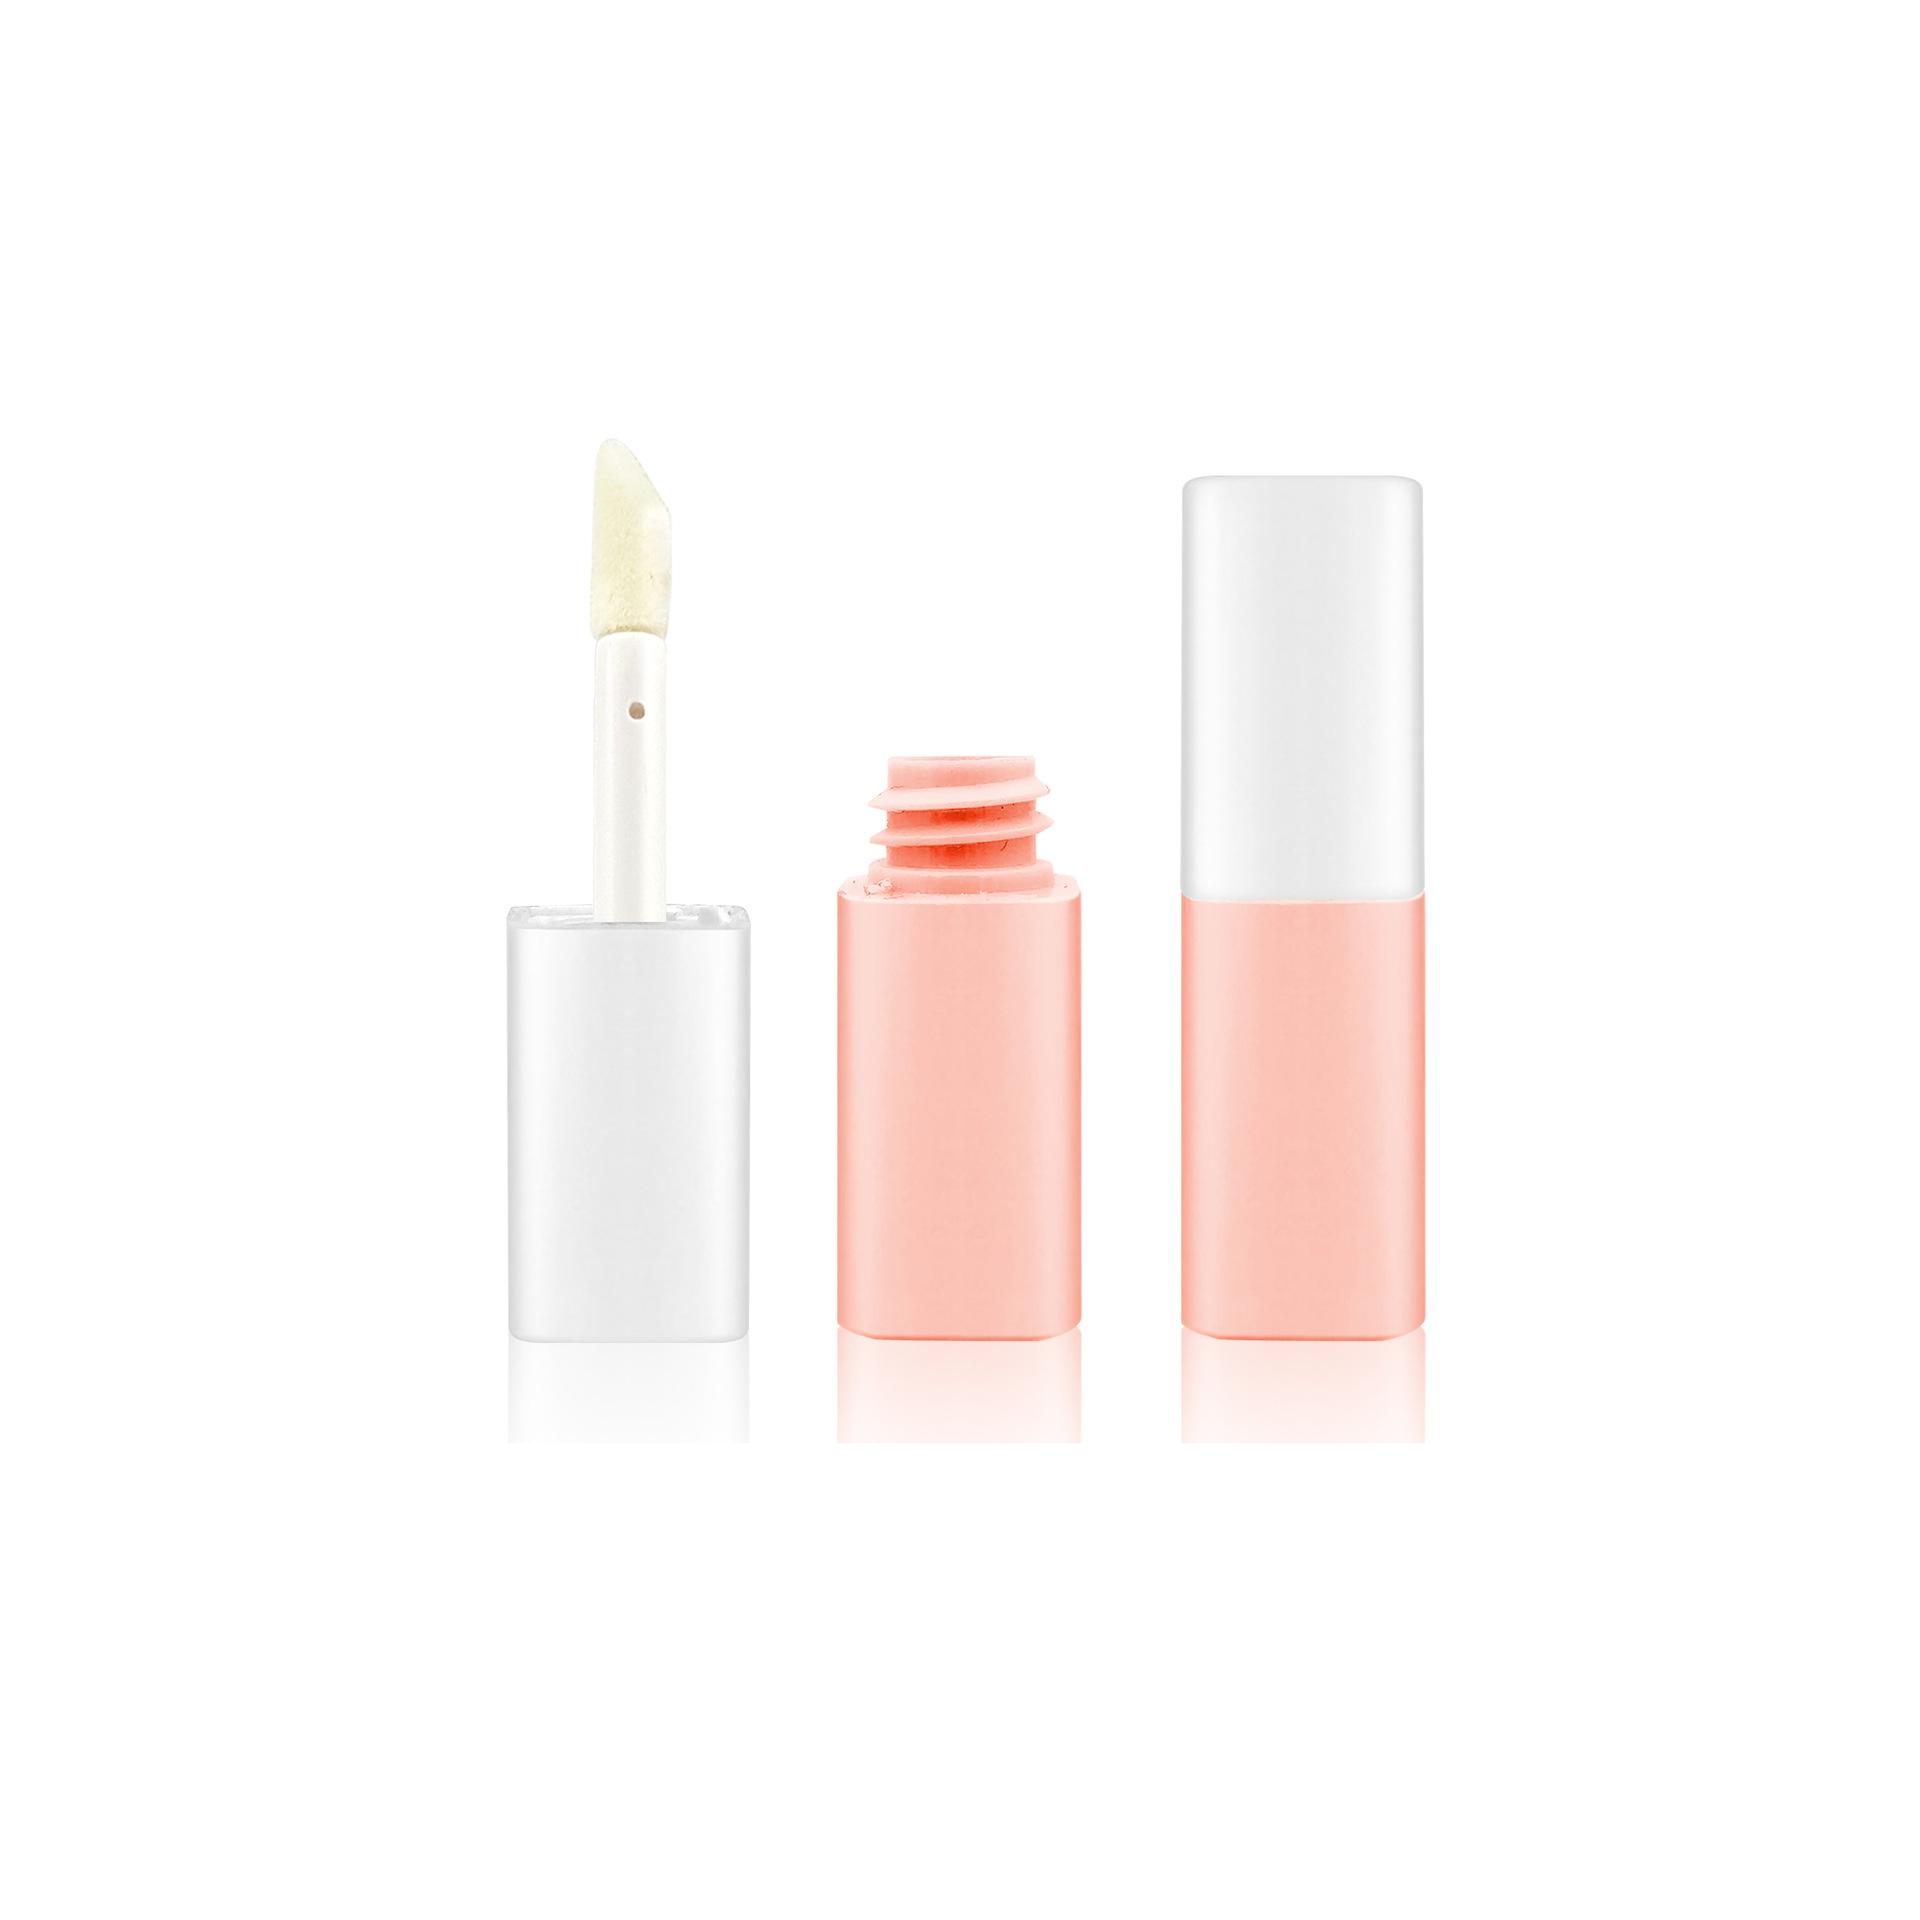 OEM Customized Lipstick Gold Tube - square mini cute Lipgloss Tube pink Frosted Types of bottle Lip Gloss Containers Matte Cap Fun Empty Lip Palette – EUGENG